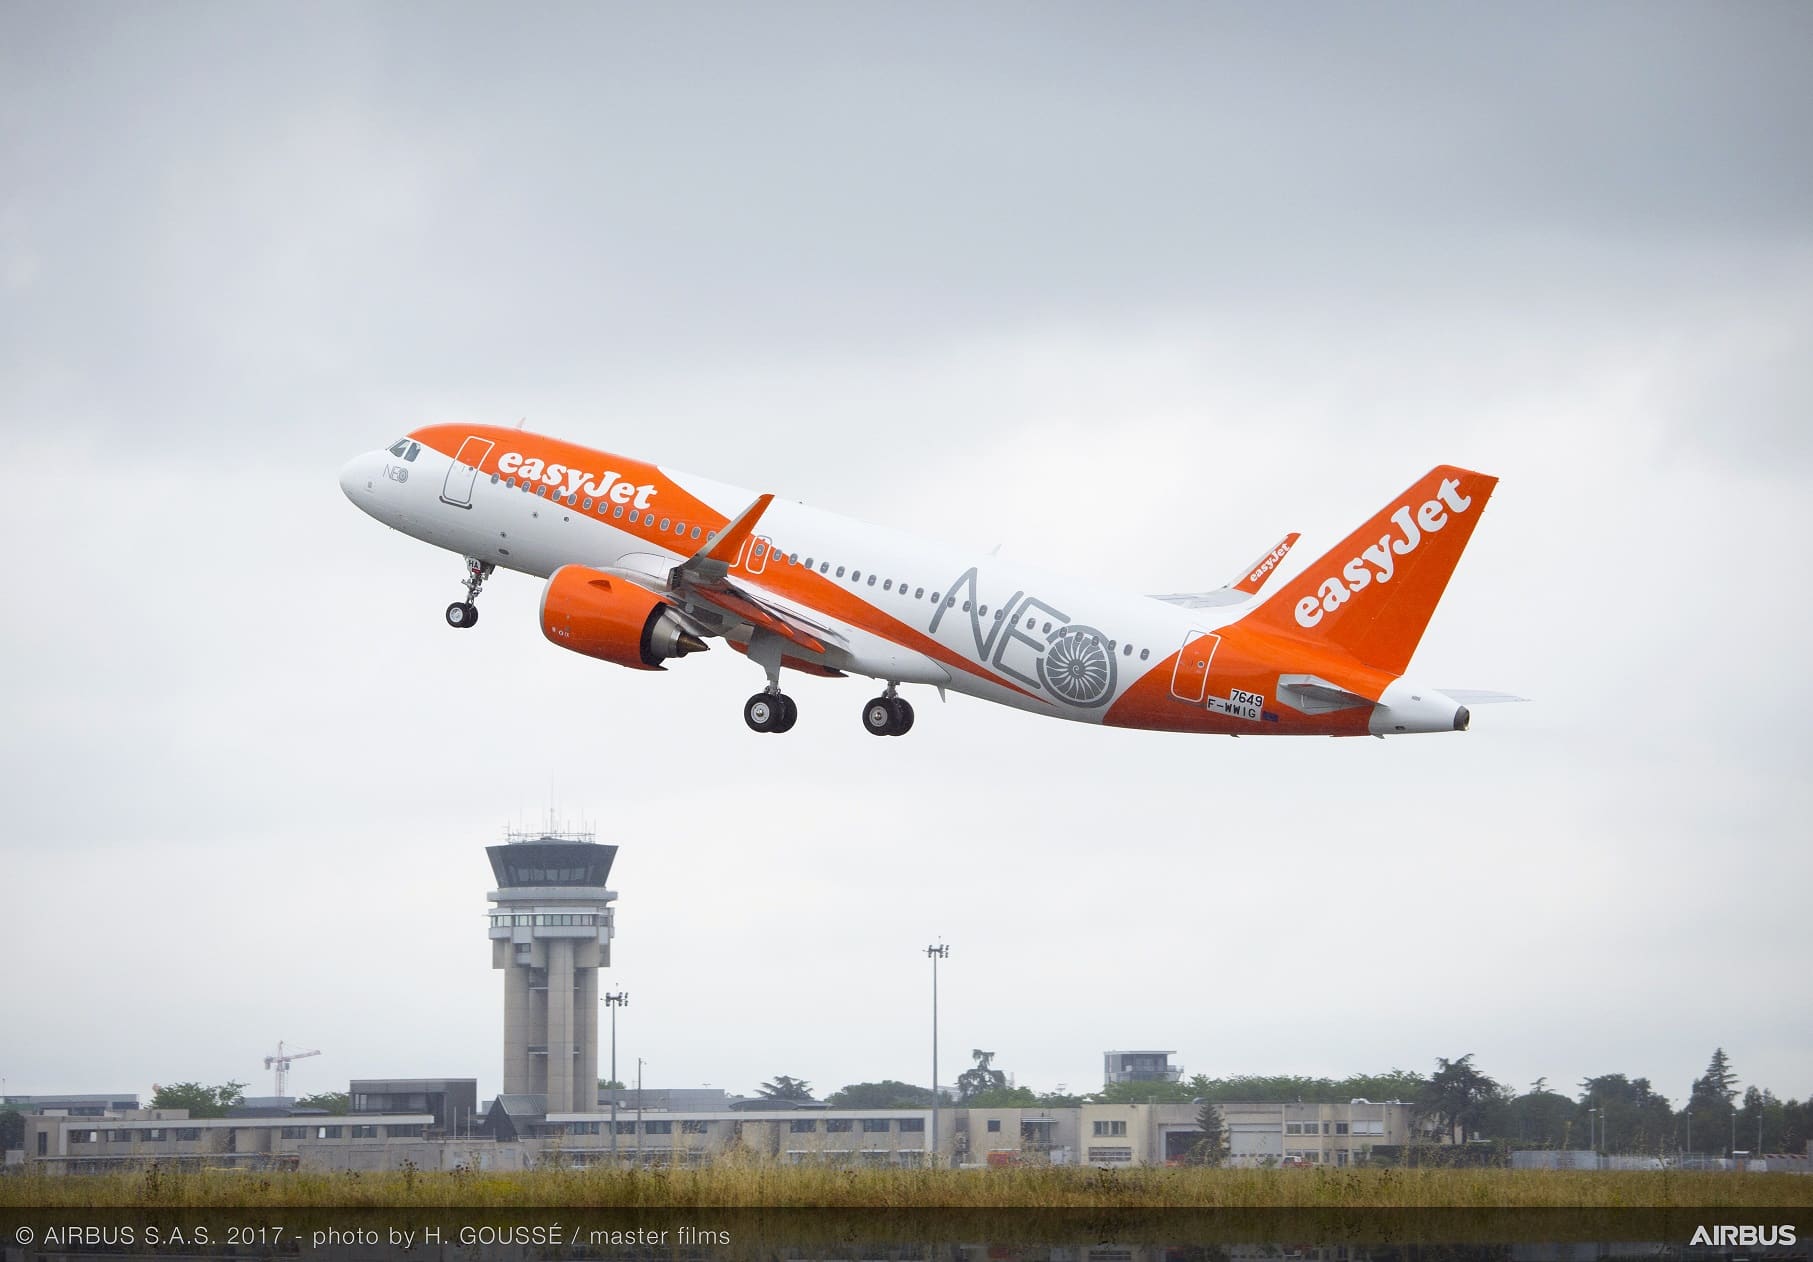 EasyJet to upgrade its Airbus A320 Family fleet with Descent Profile Optimisation and Continuous Descent Approach to further improve efficiency, fuel savings and noise emissions